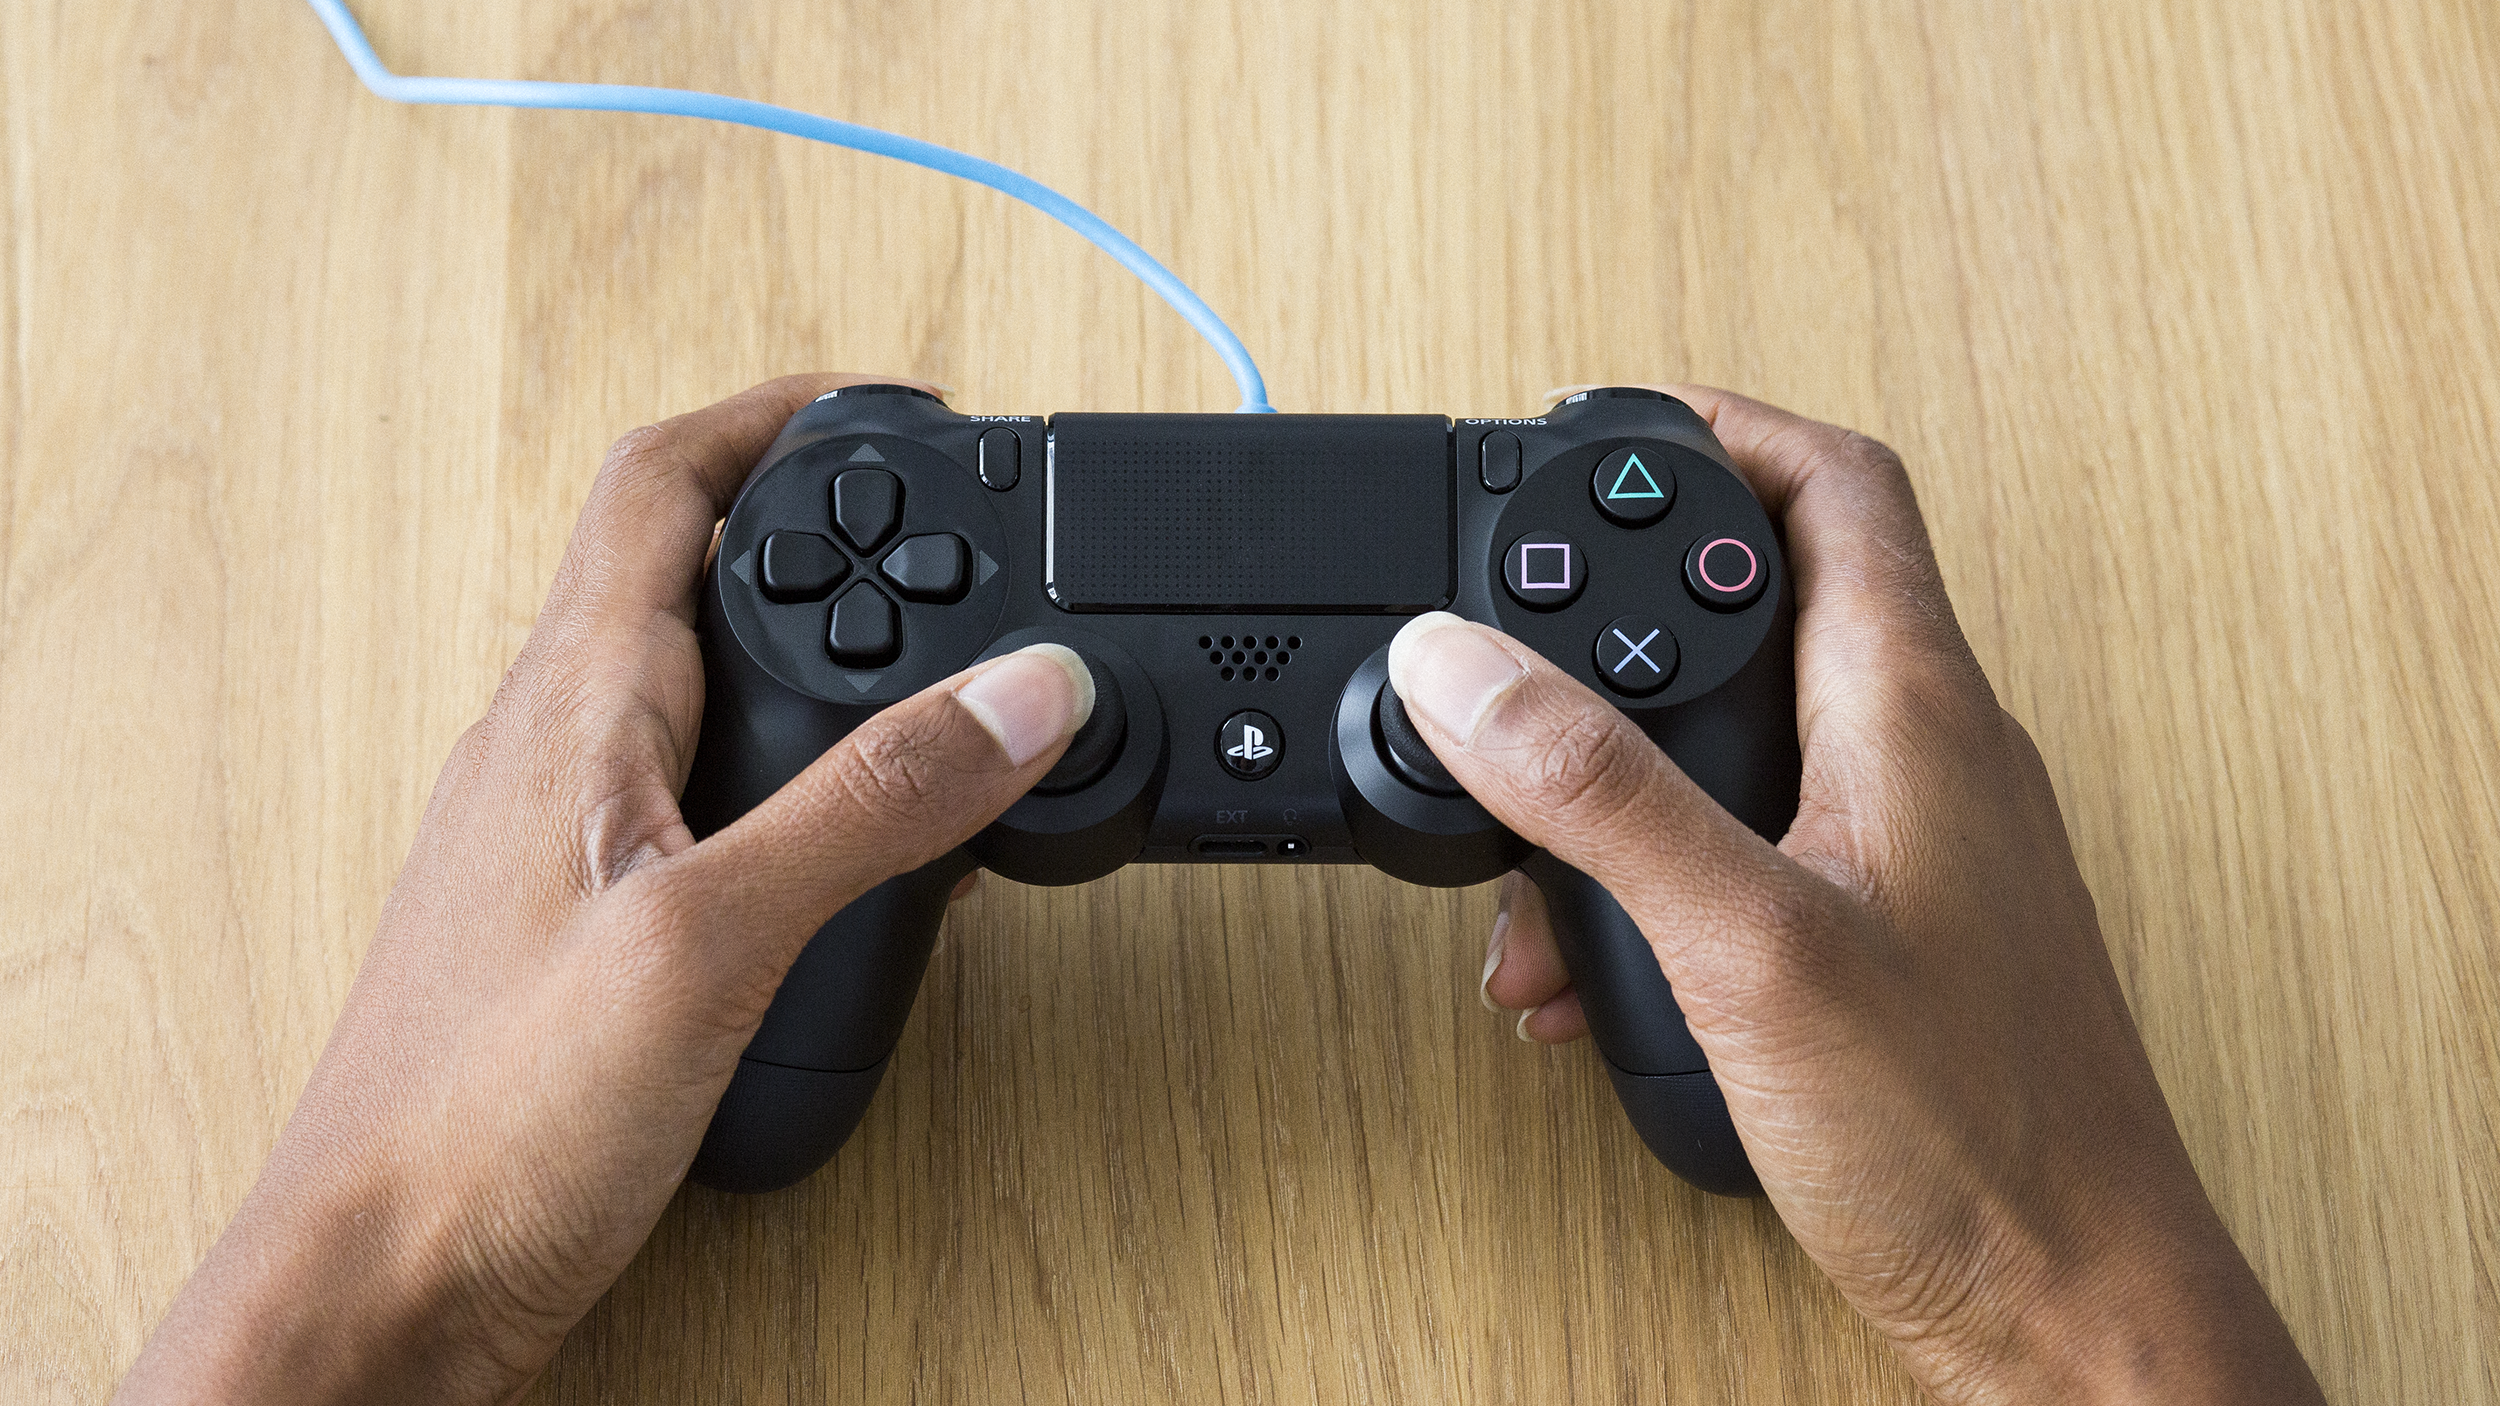 An overhead shot of two hands holding a wired Playstation 4 controller, over a wooden table.